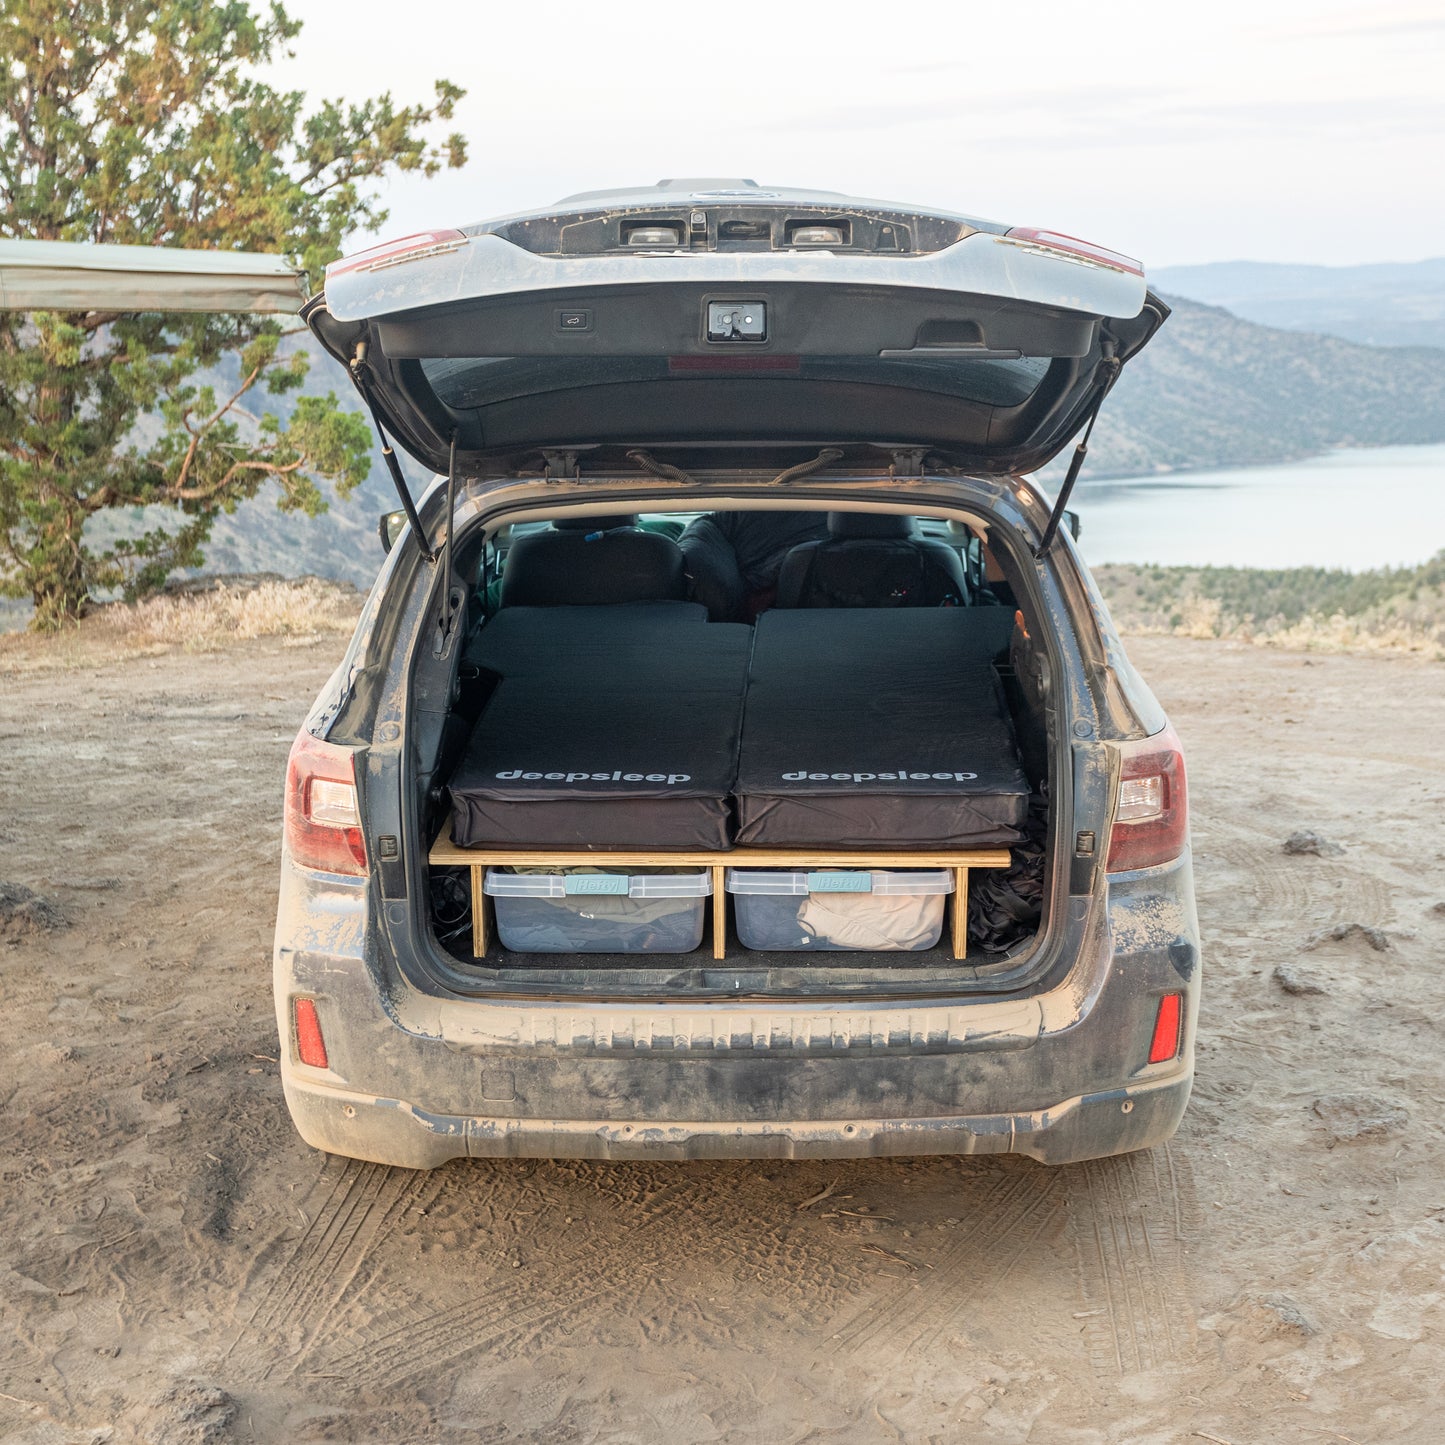 The trunk of a Subaru Outback with a Deepsleep Solo Mat by CarToCamp in it.